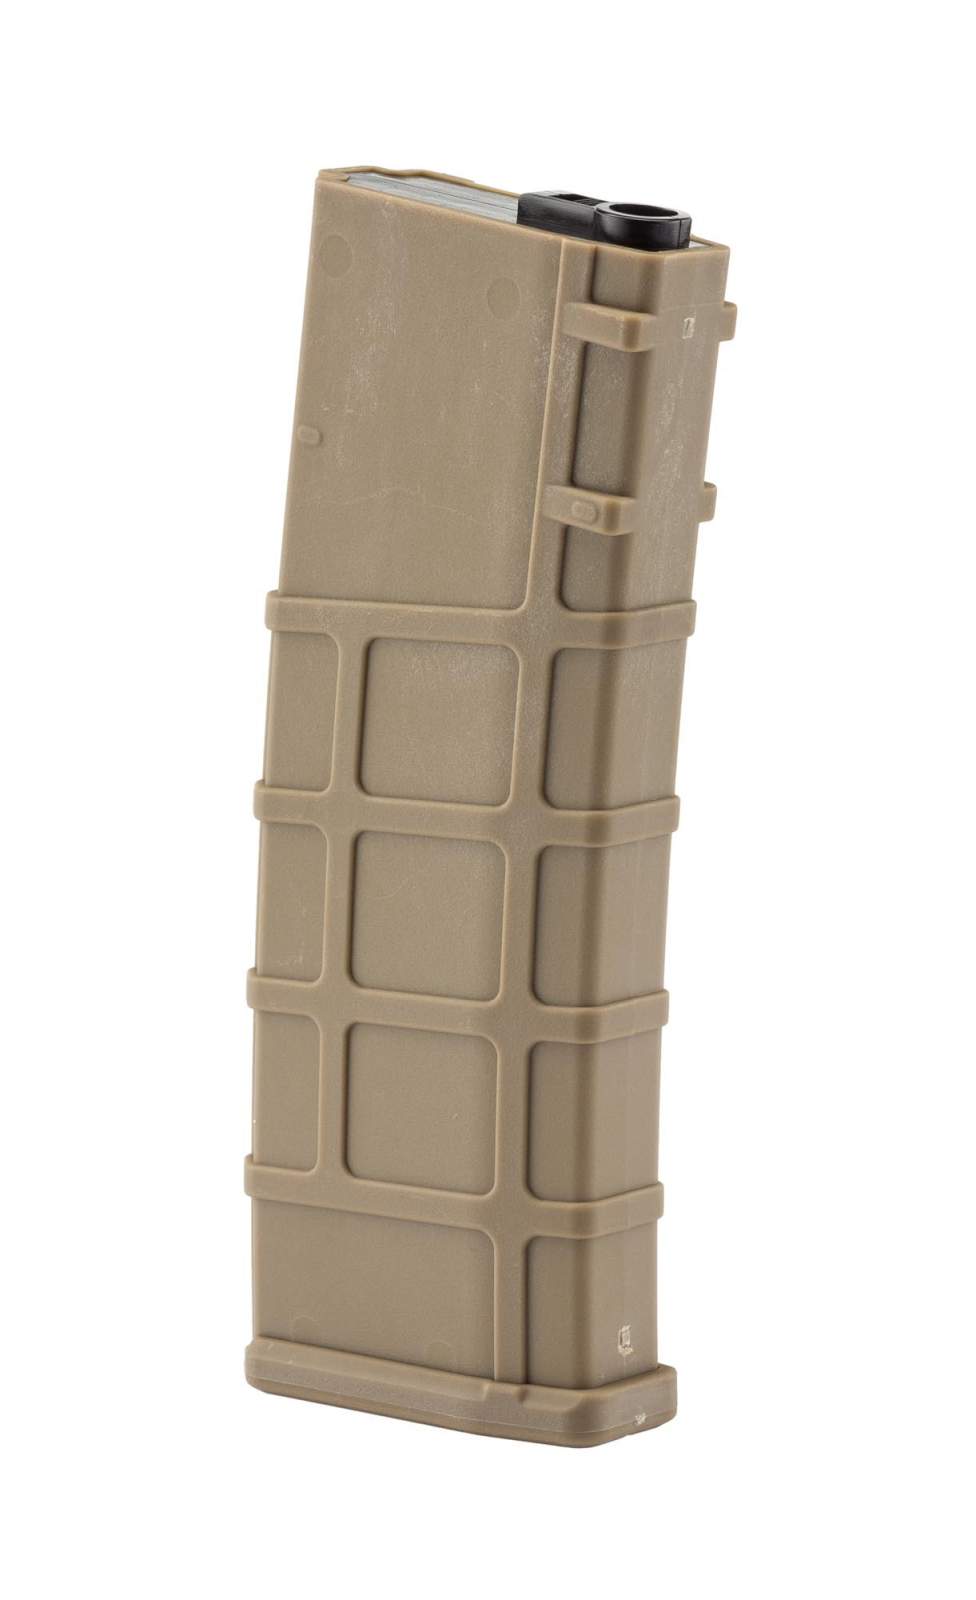 Photo Airsoft Magazine Real Cap 30 rds for M4 AEG Polymer Tan - Pack of 6 pcs